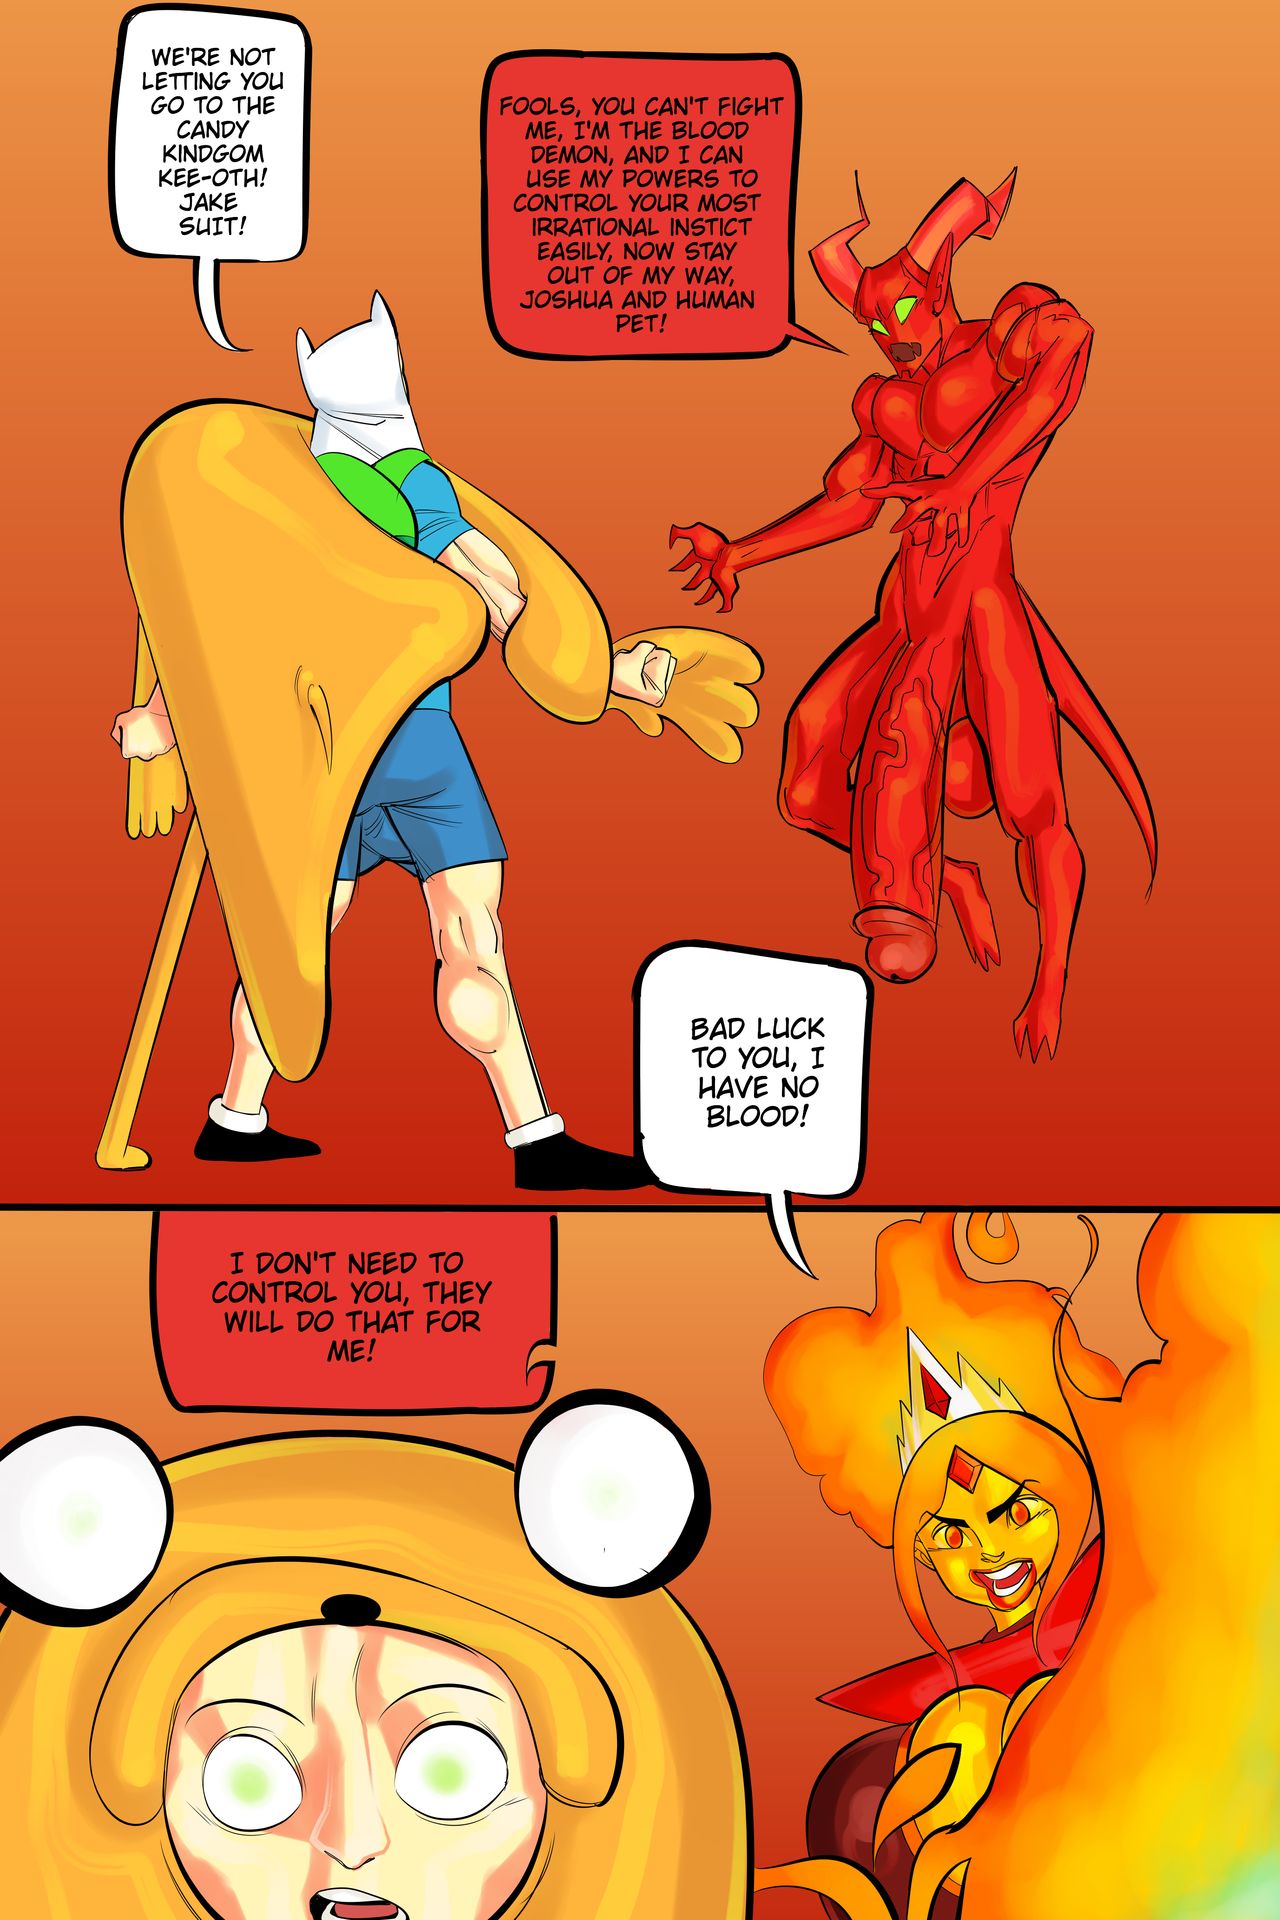 Little People Adventure Time Porn - Kee-Oth Possession (Adventure Time) Croquant - FreeAdultComix